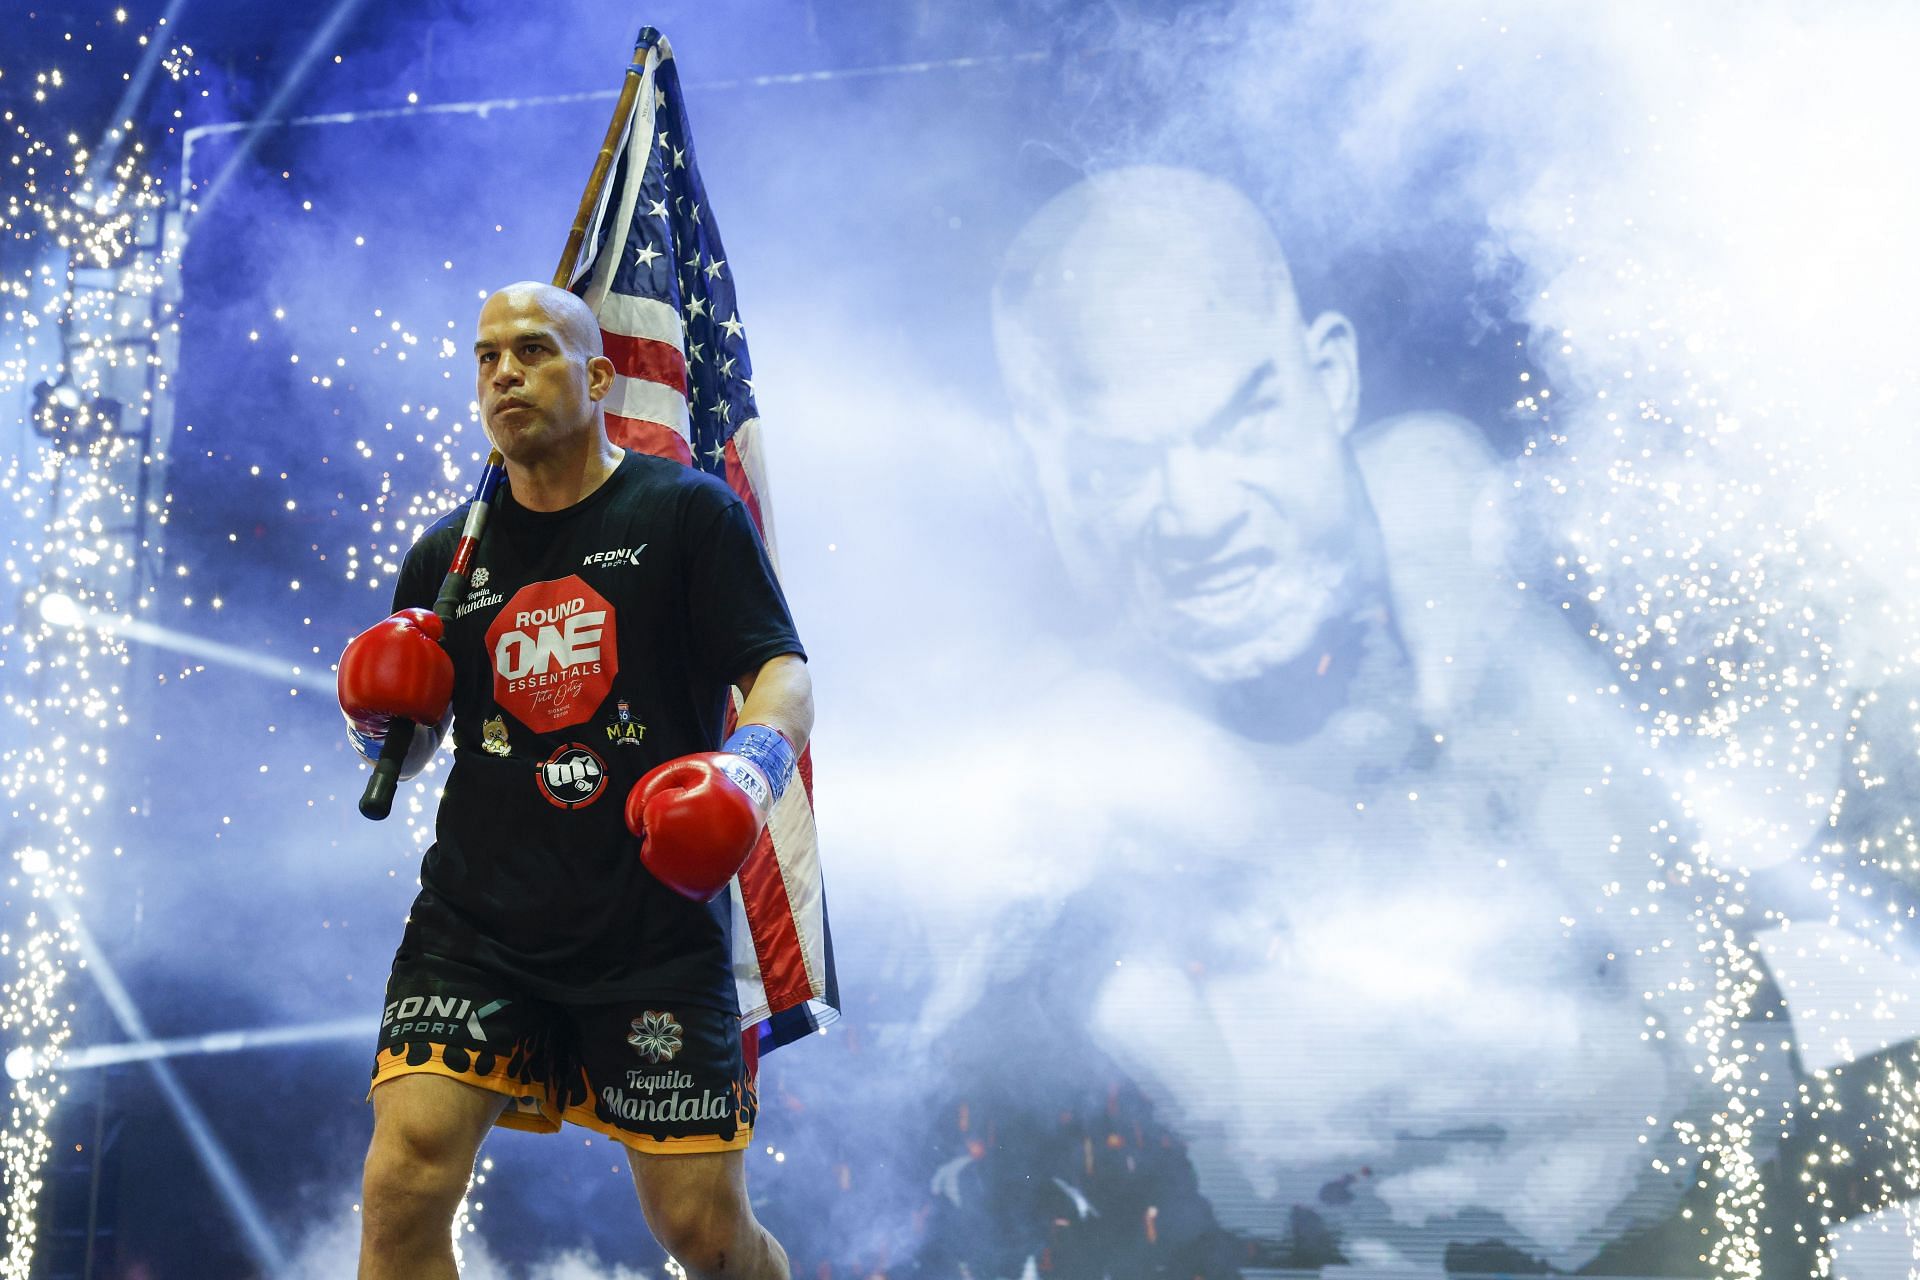 Tito Ortiz's friendship with Chuck Liddell became a major rivalry when they found themselves atop the light-heavyweight division